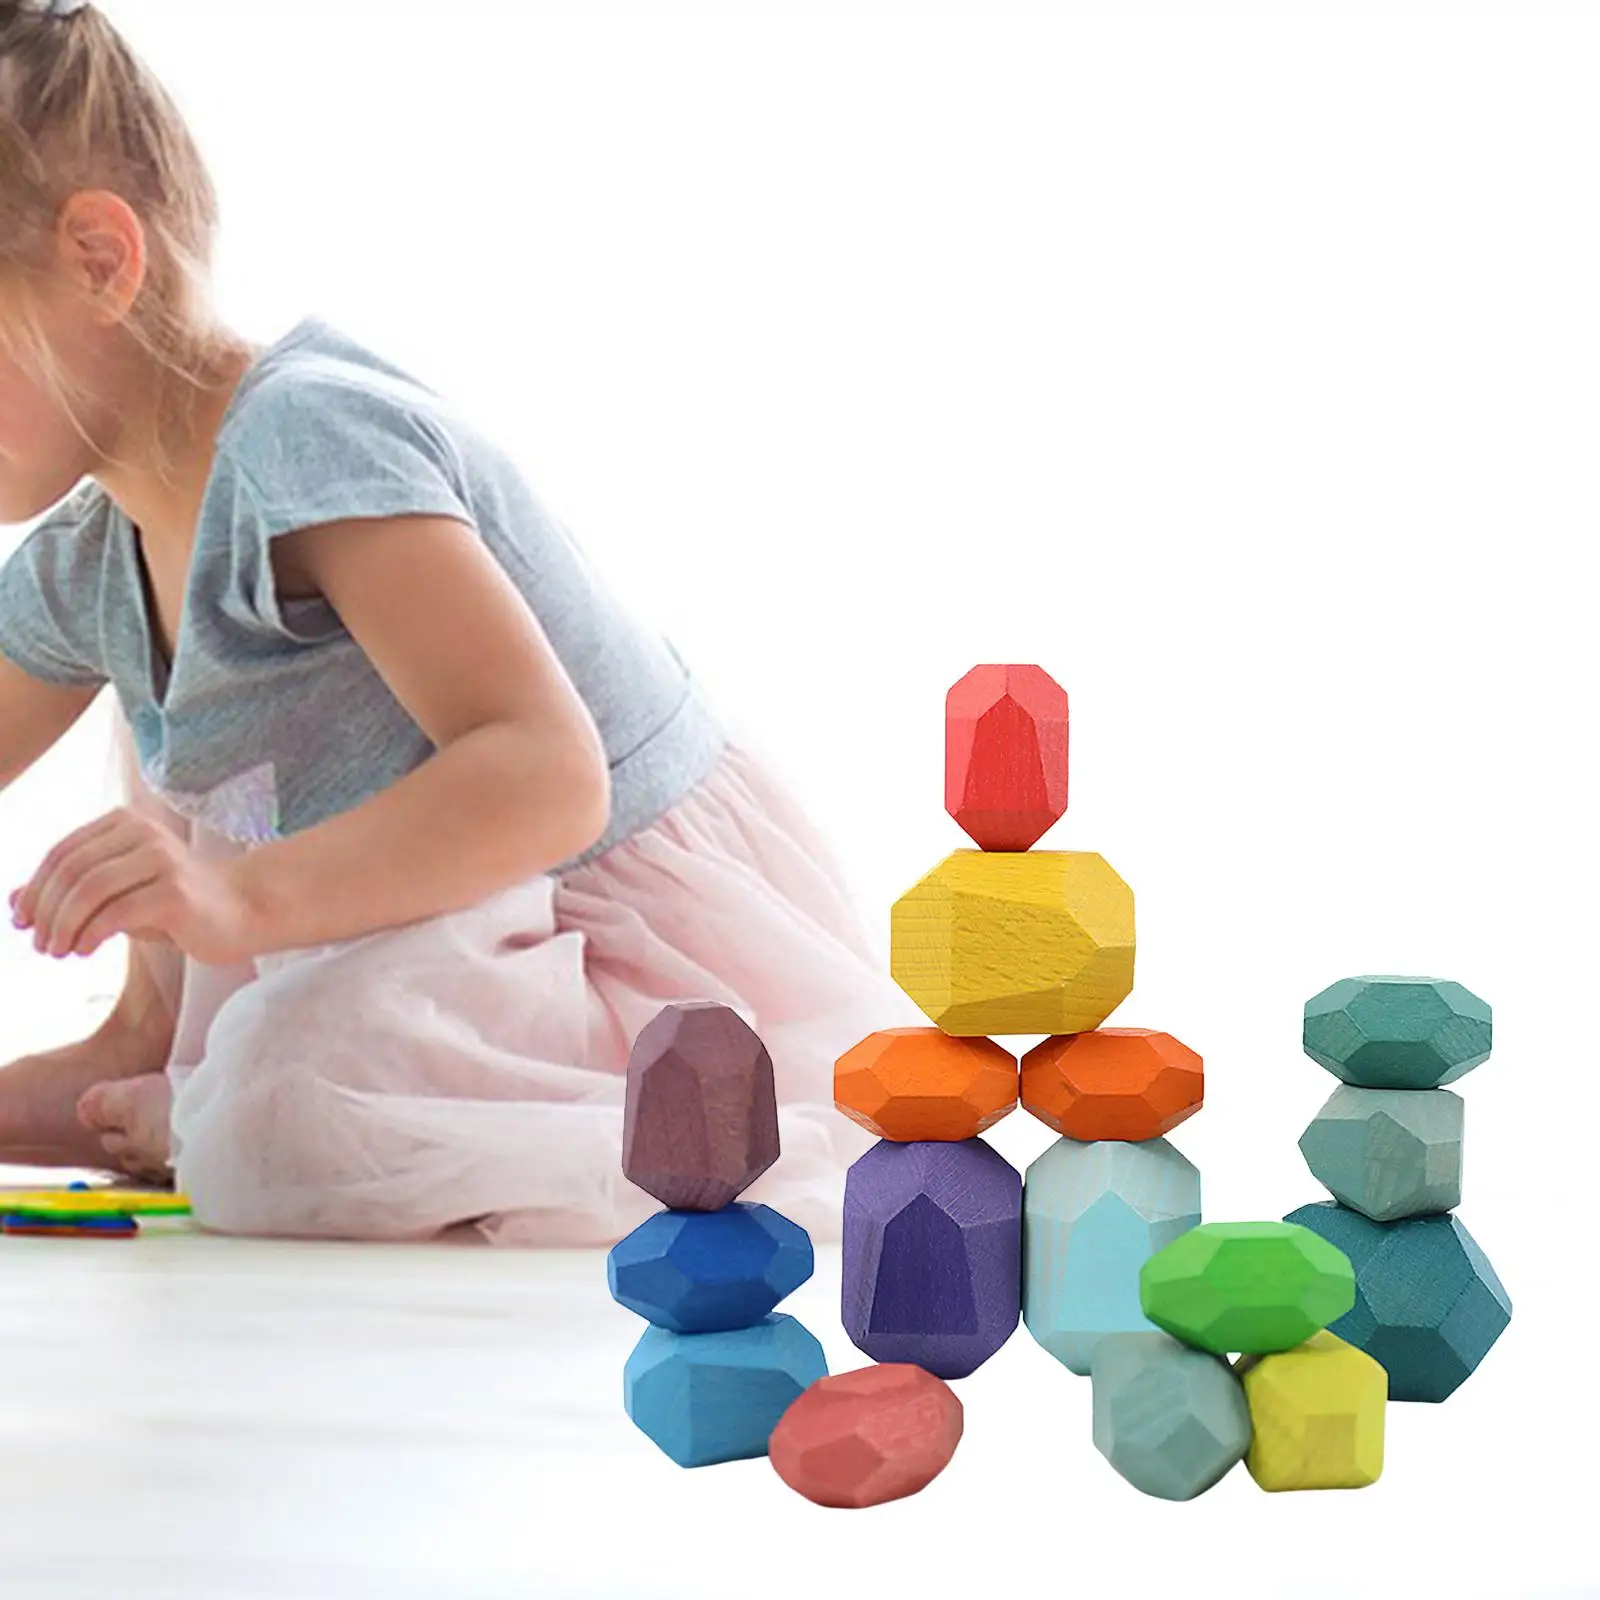 Wooden Balancing Stacking Stones Montessori Educational for 3 Years up Kids